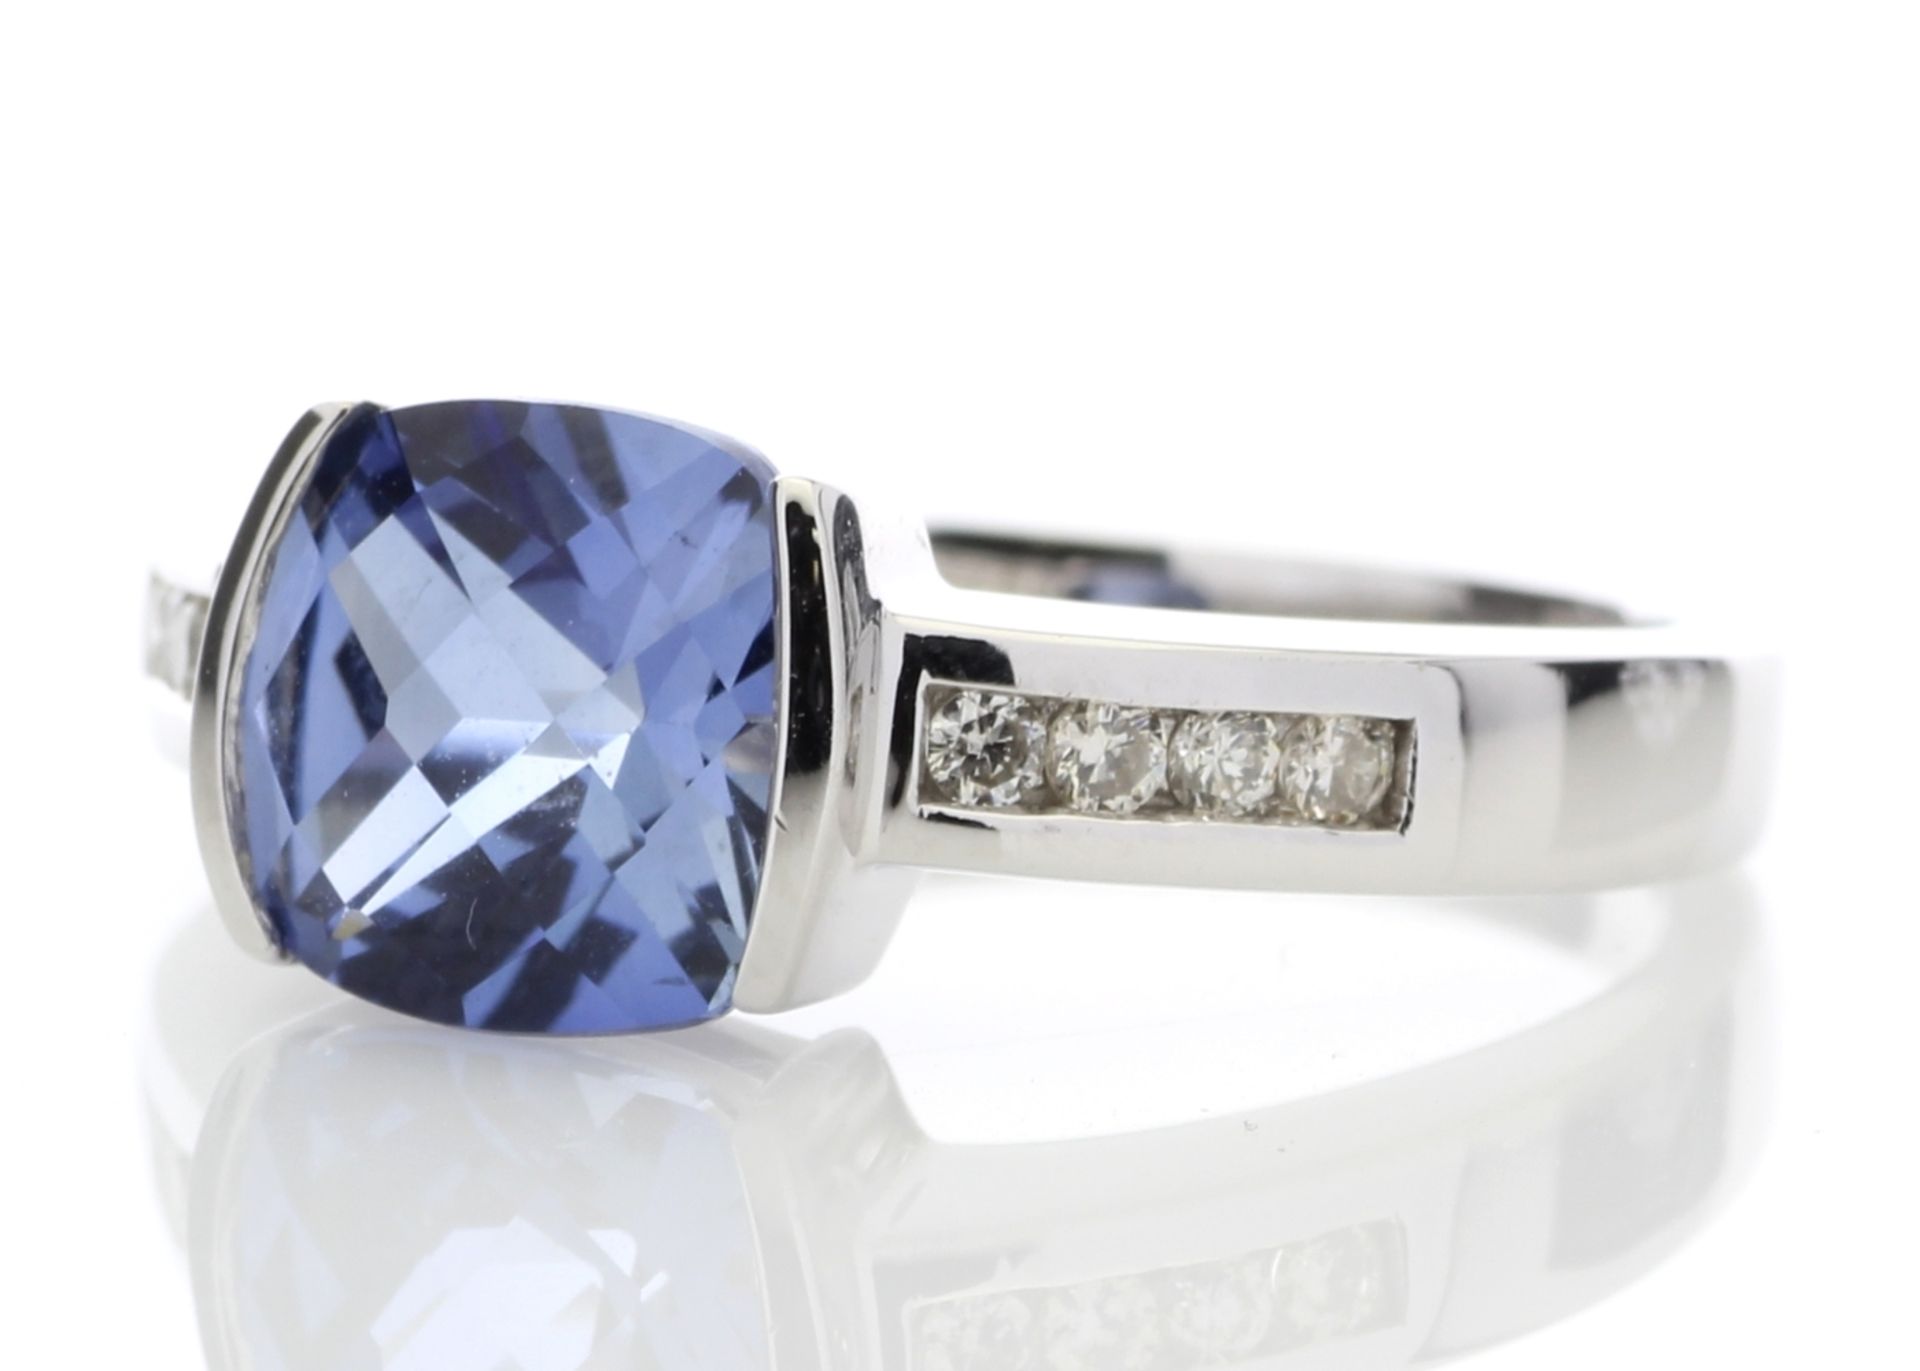 9ct White Gold Created Ceylon Sapphire Diamond Ring 0.11 Carats - Valued by AGI £695.00 - This - Image 2 of 4